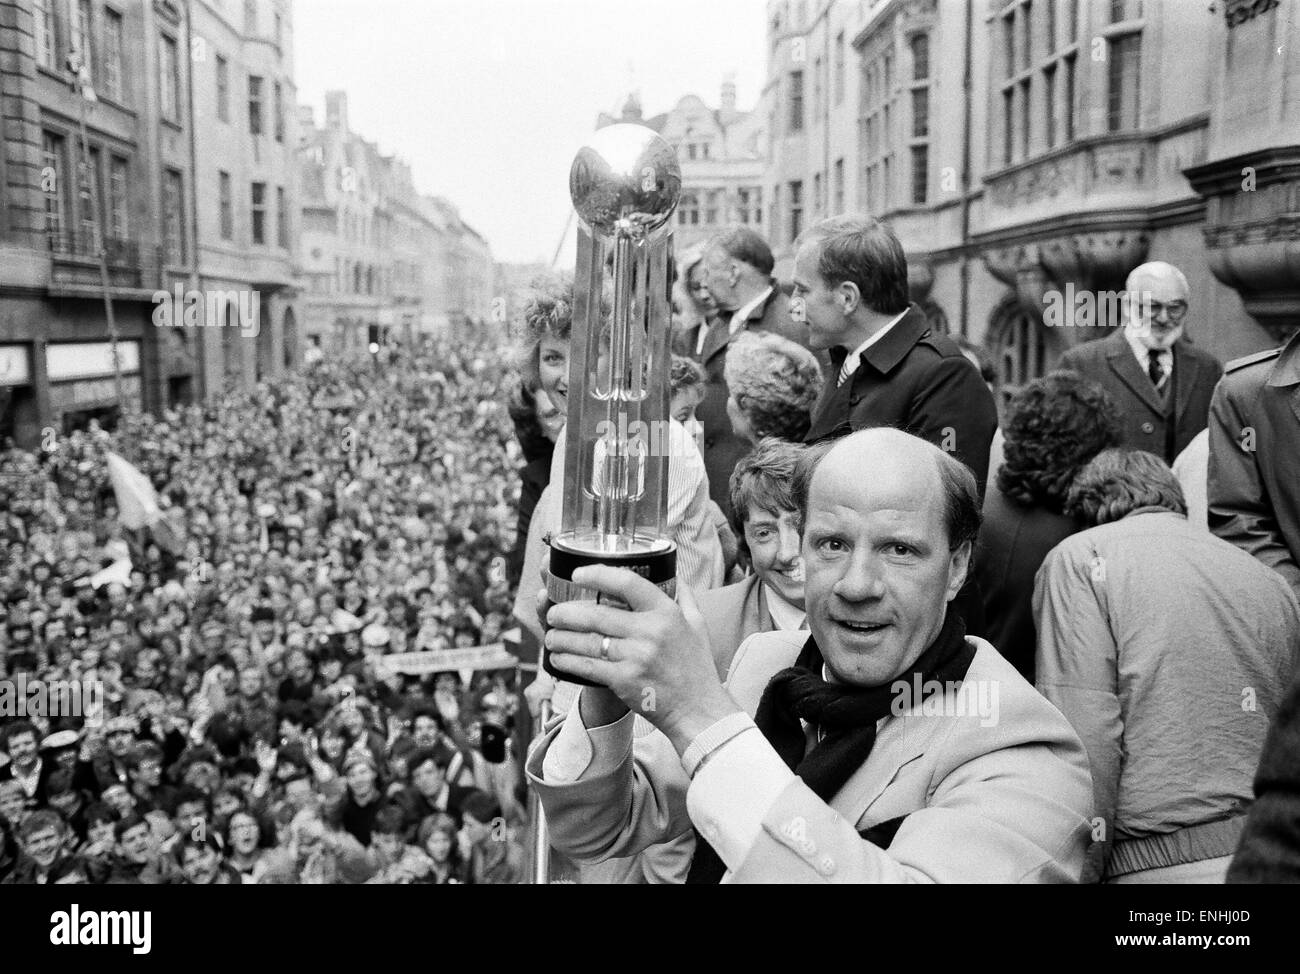 Oxford United FC manager Jim Smith, holds aloft the Second Division Championship trophy on an open top bus parade, cheered by thousands of fans who lined the streets of Oxford to celebrate their team's success. 13th May 1985. Stock Photo